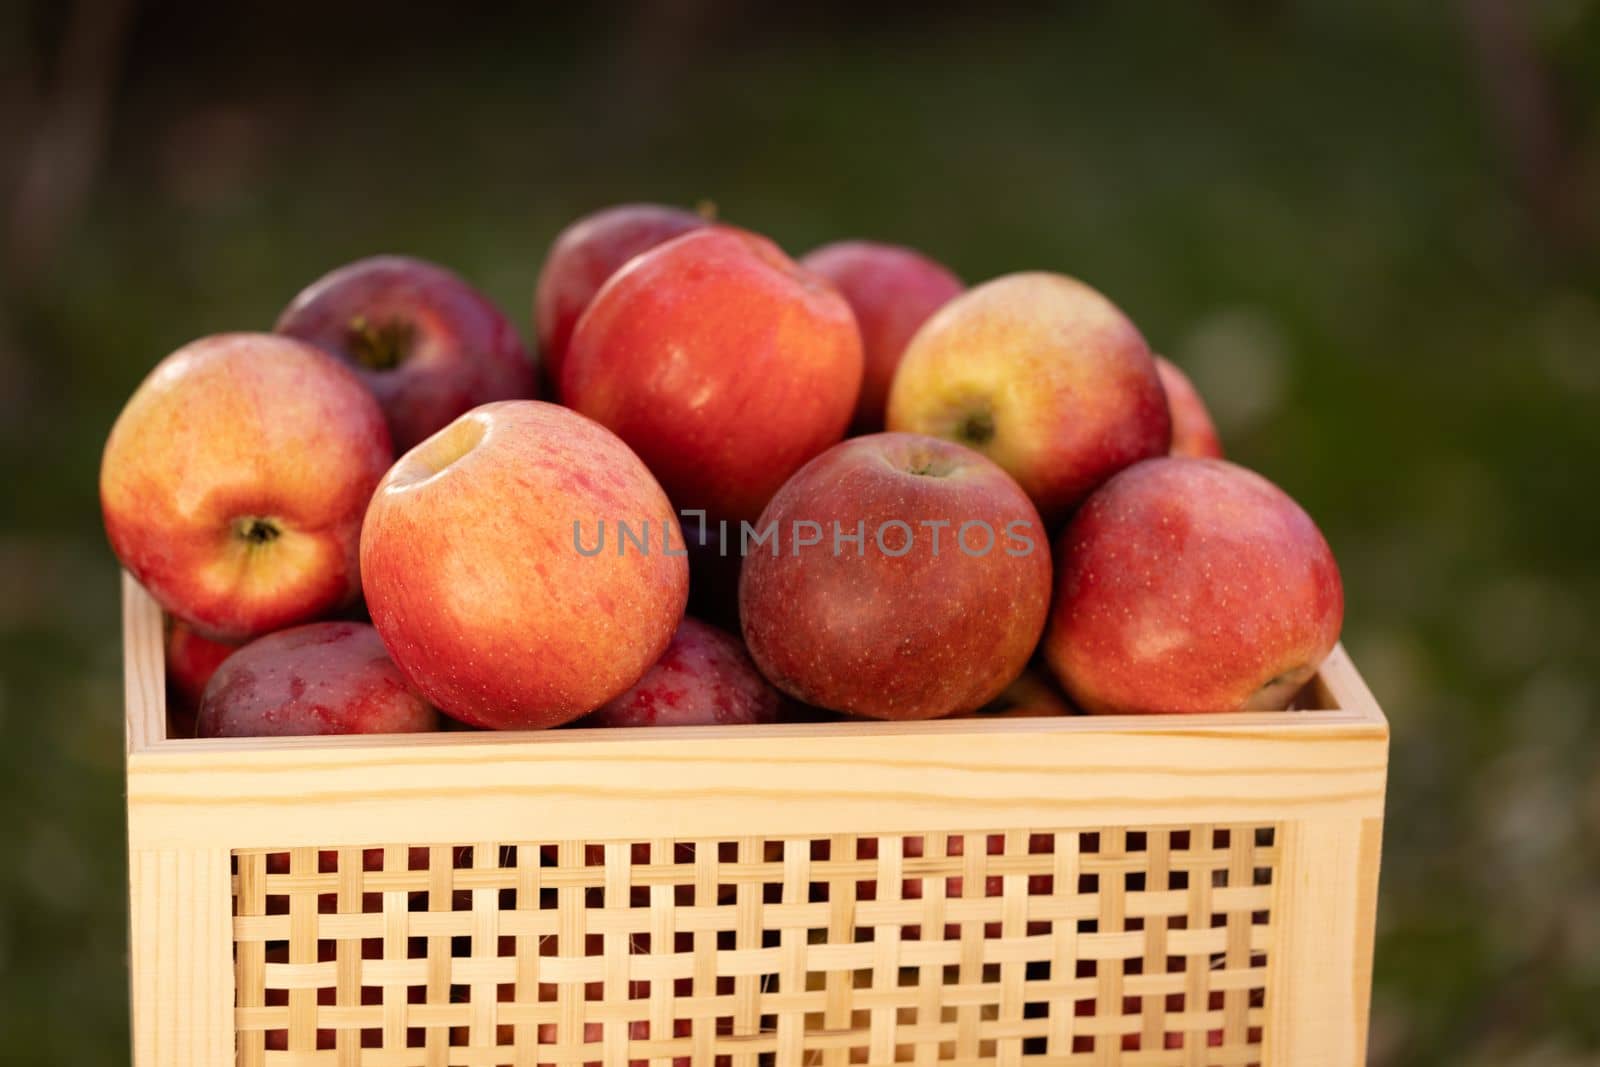 Red apples in a drawer. Autumn season time. Apple harvest in the garden. Fresh organic fruits in the garden during harvest season.